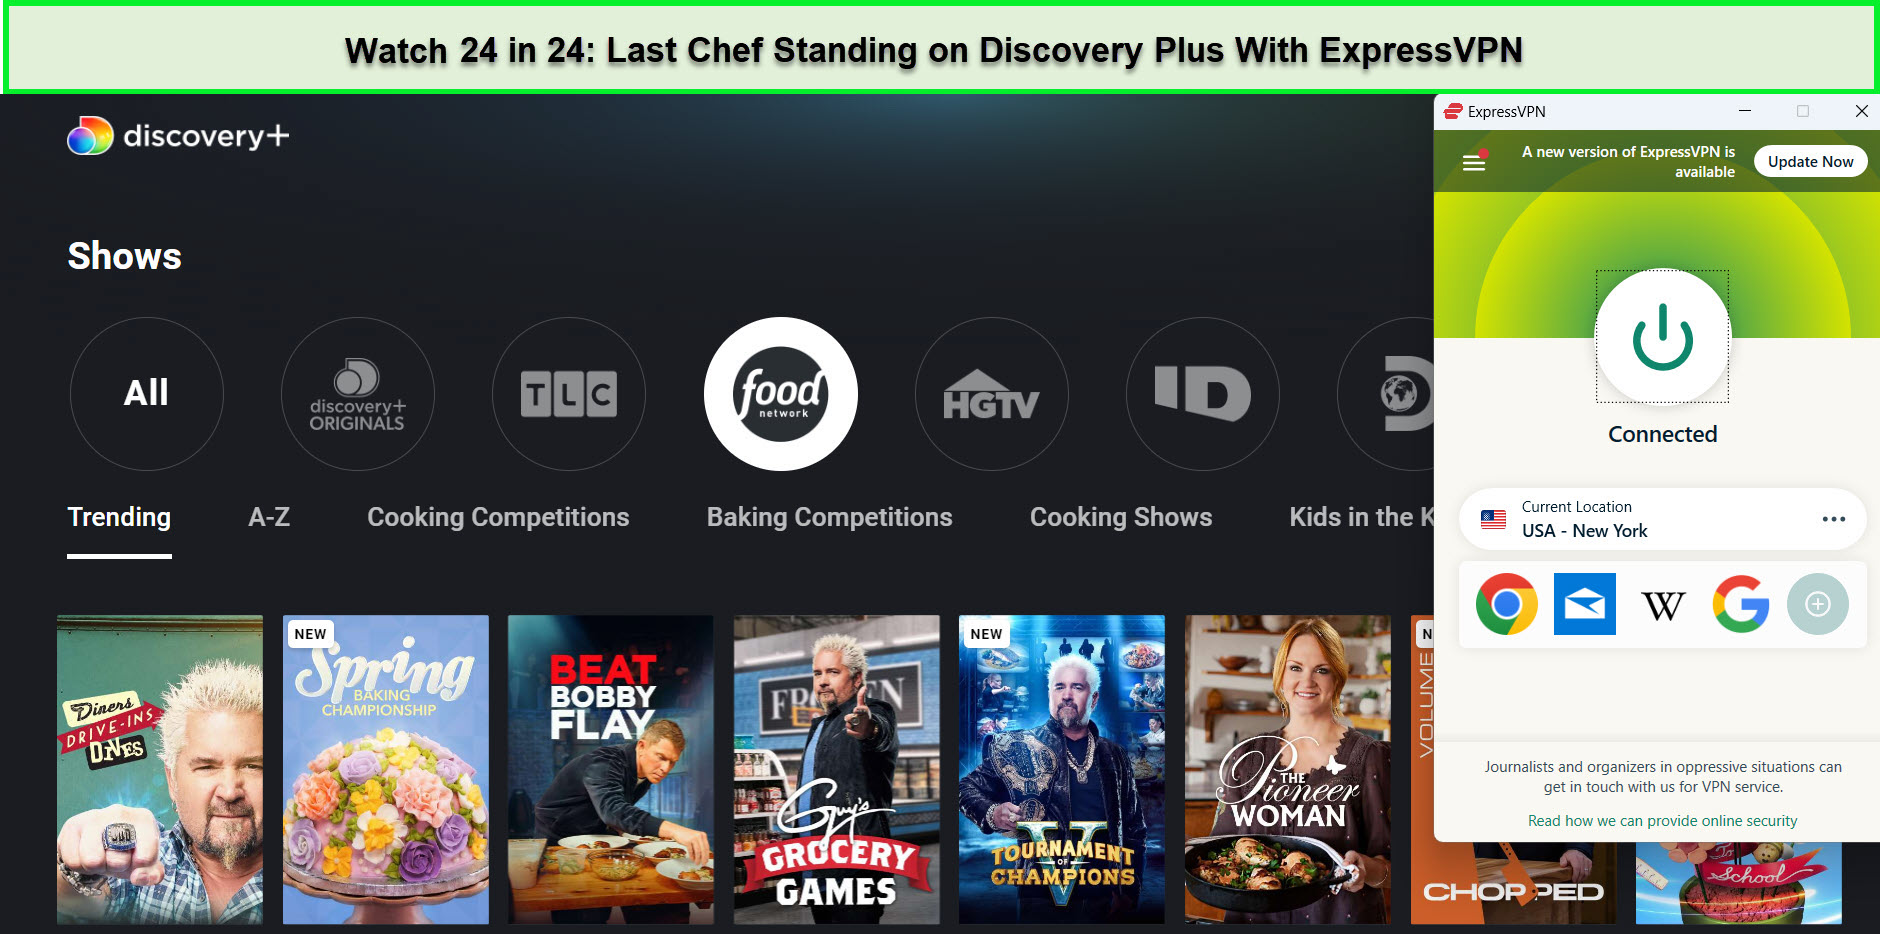 Watch-24-in-24-Last-Chef-Standing-in-Hong Kong-on-Discovery-Plus-with-ExpressVPN